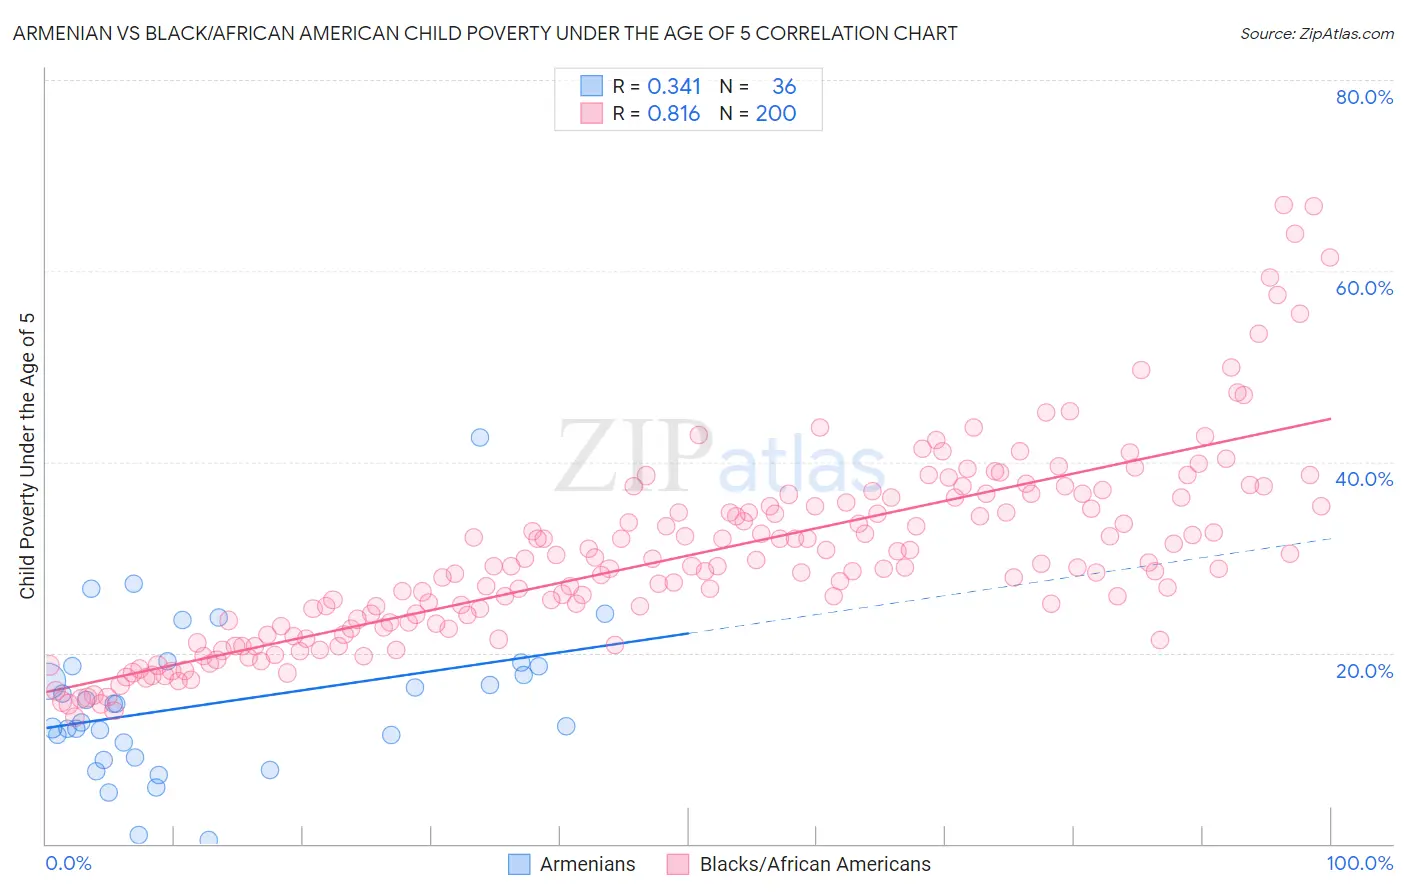 Armenian vs Black/African American Child Poverty Under the Age of 5